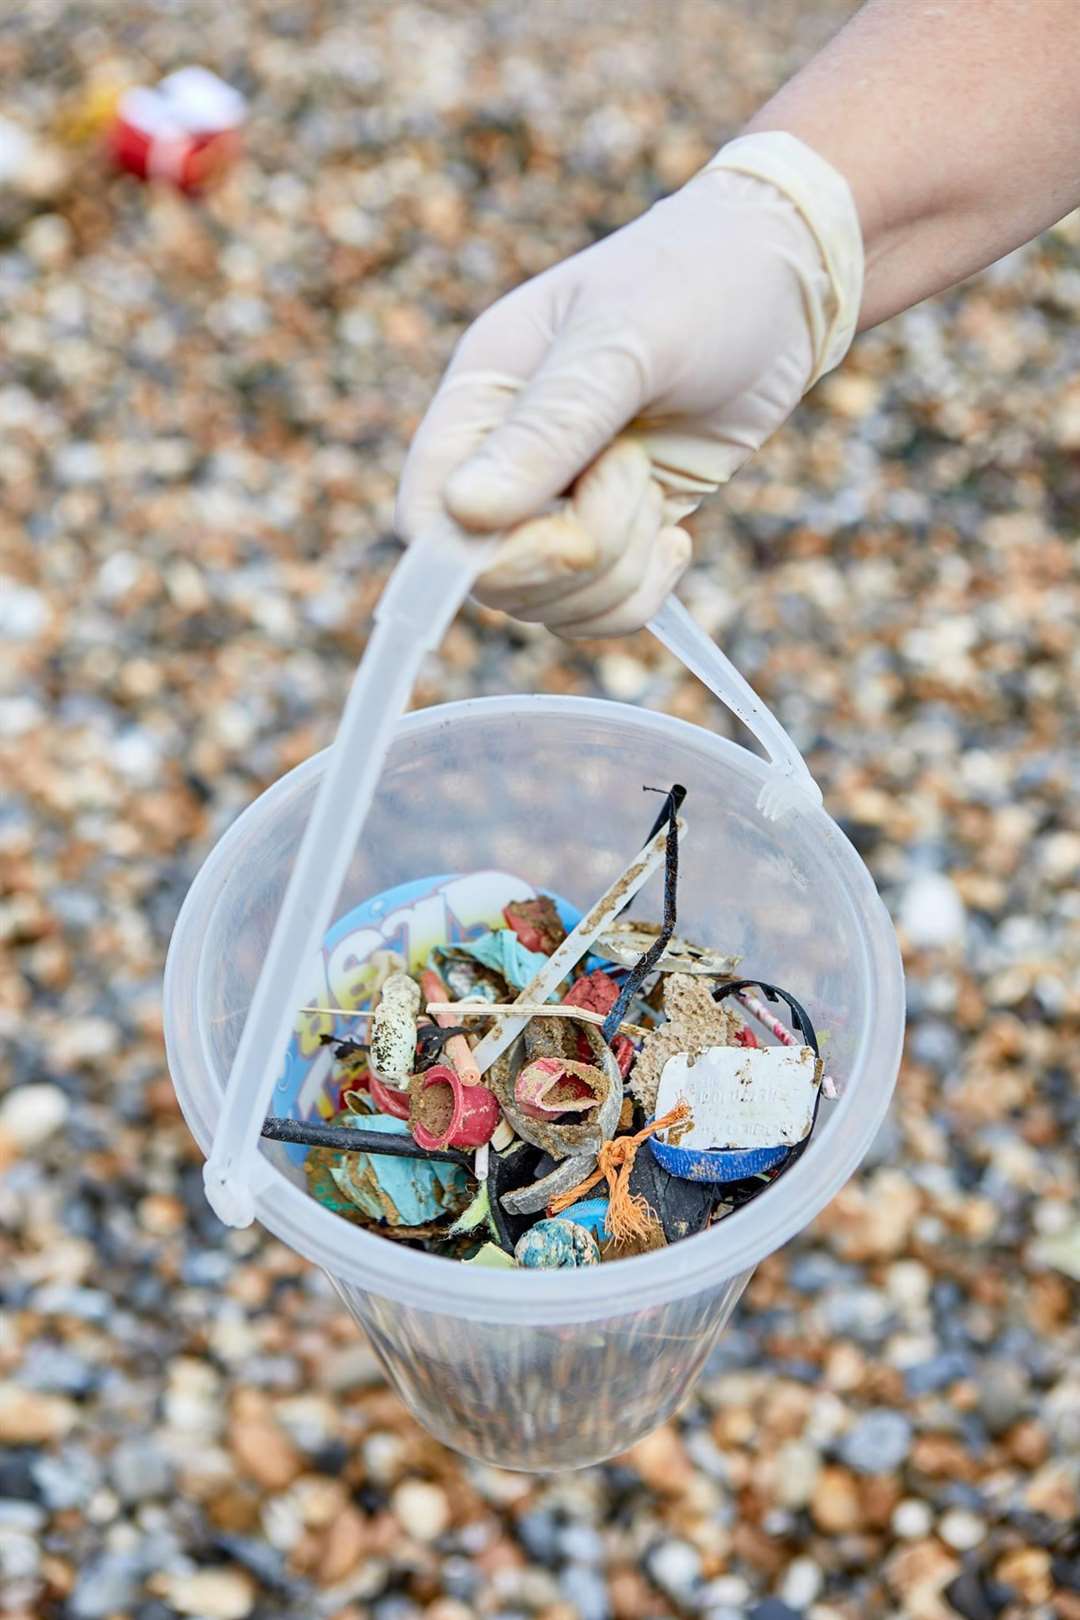 Fishing tackle and plastics are among the most commonly spotted pieces of rubbish found at beach cleans